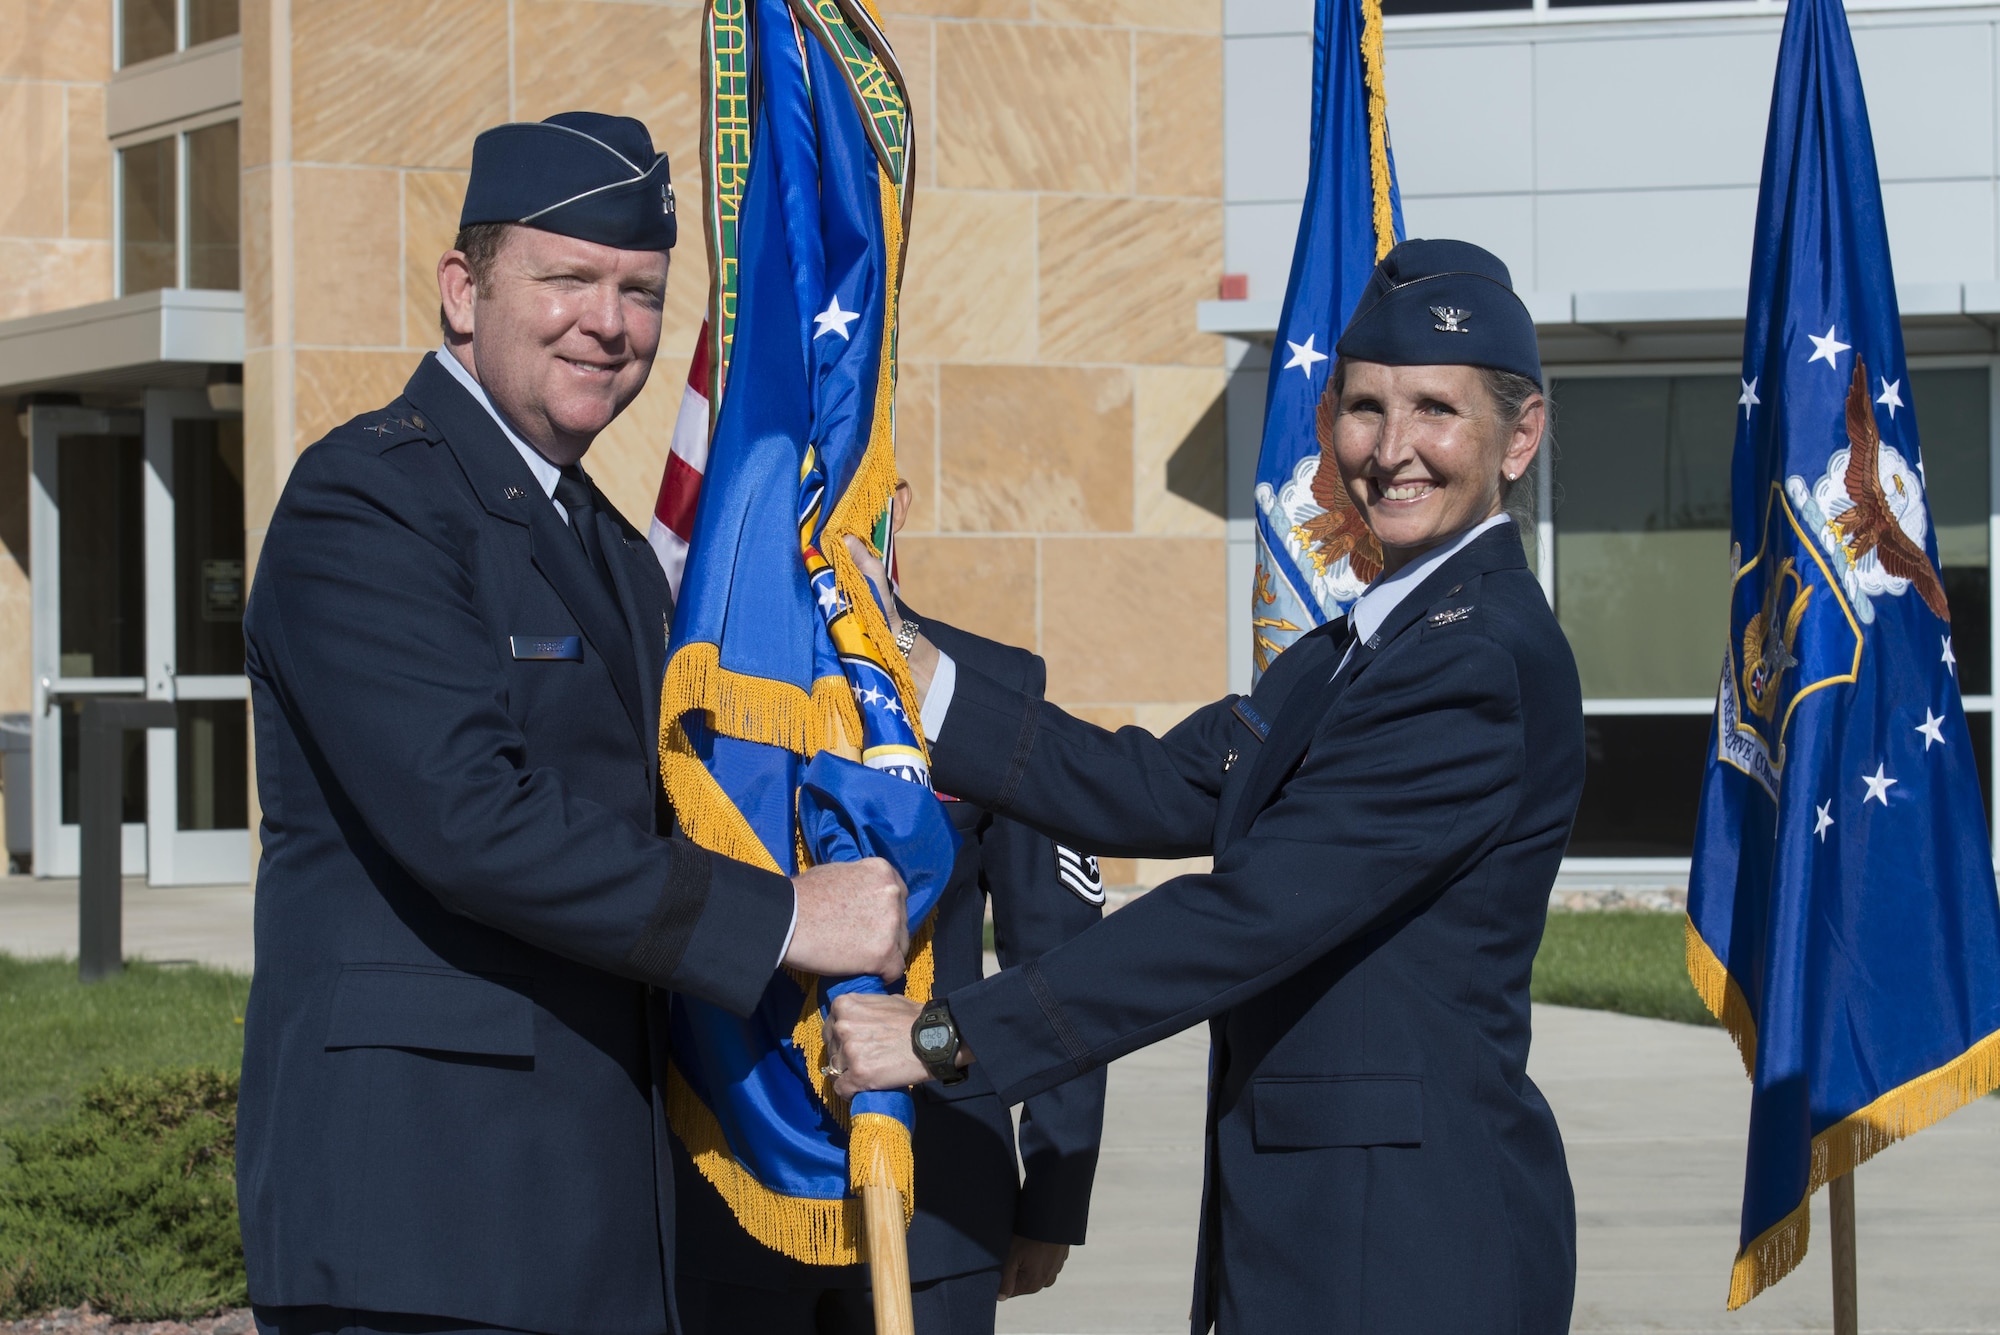 Col. Traci L. Kueker-Murphy receives the 310th Space Wing colors from Maj. Gen. Richard W. Scobee, 10th Air Force commander, during a change of command ceremony as she assumes command of the 310th Space Wing, Schriever AFB, Colo., Sept. 17, 2016. 
(U.S. Air Force photo by Staff Sgt. Christopher Moore/Released)